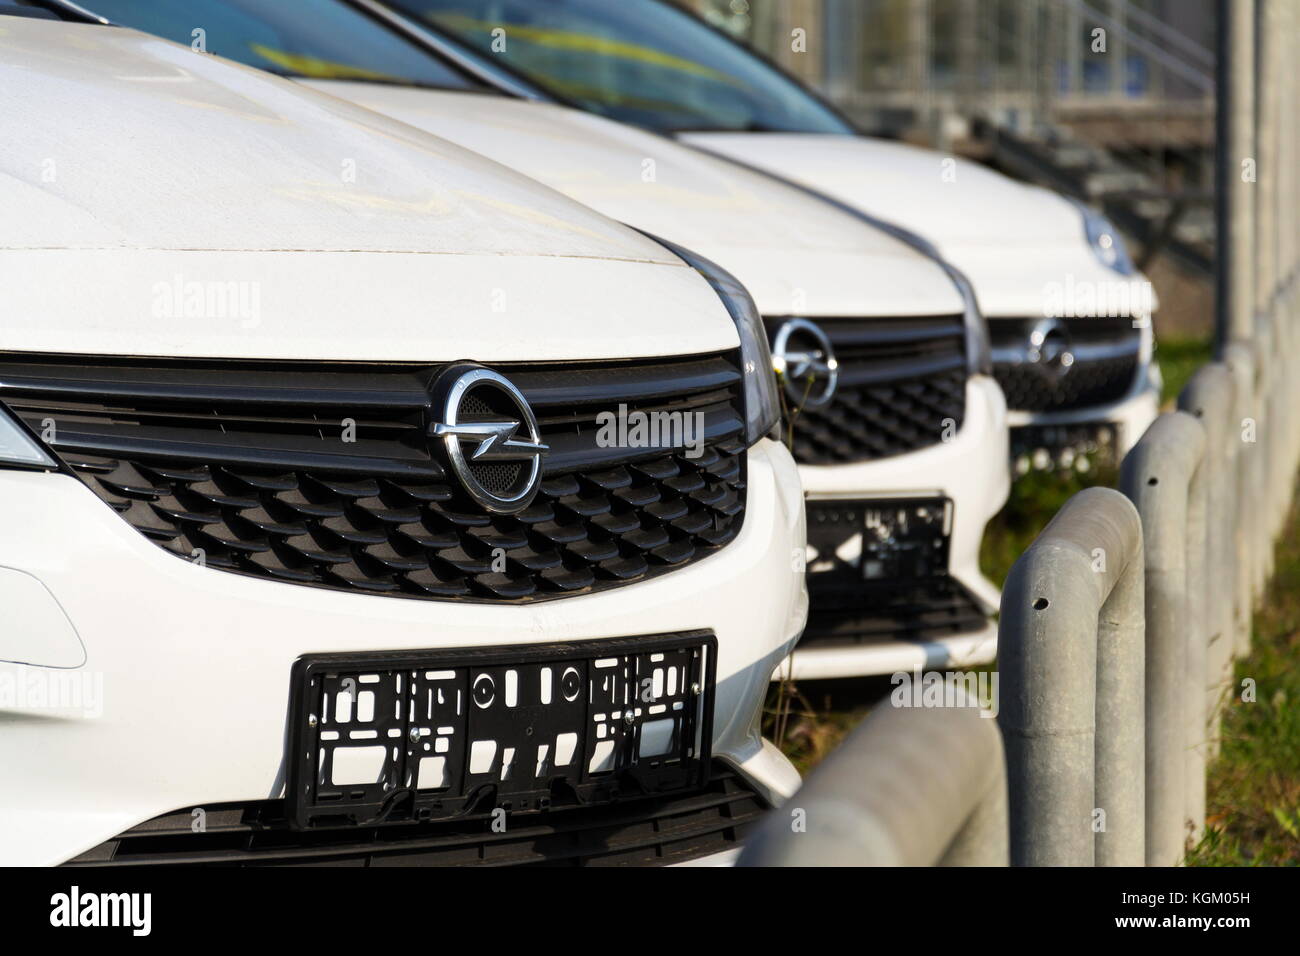 PRAGUE, CZECH REPUBLIC - NOVEMBER 5: Opel cars in front of dealership building on November 5, 2017 in Prague. PSA Group plans to cut the number of mod Stock Photo